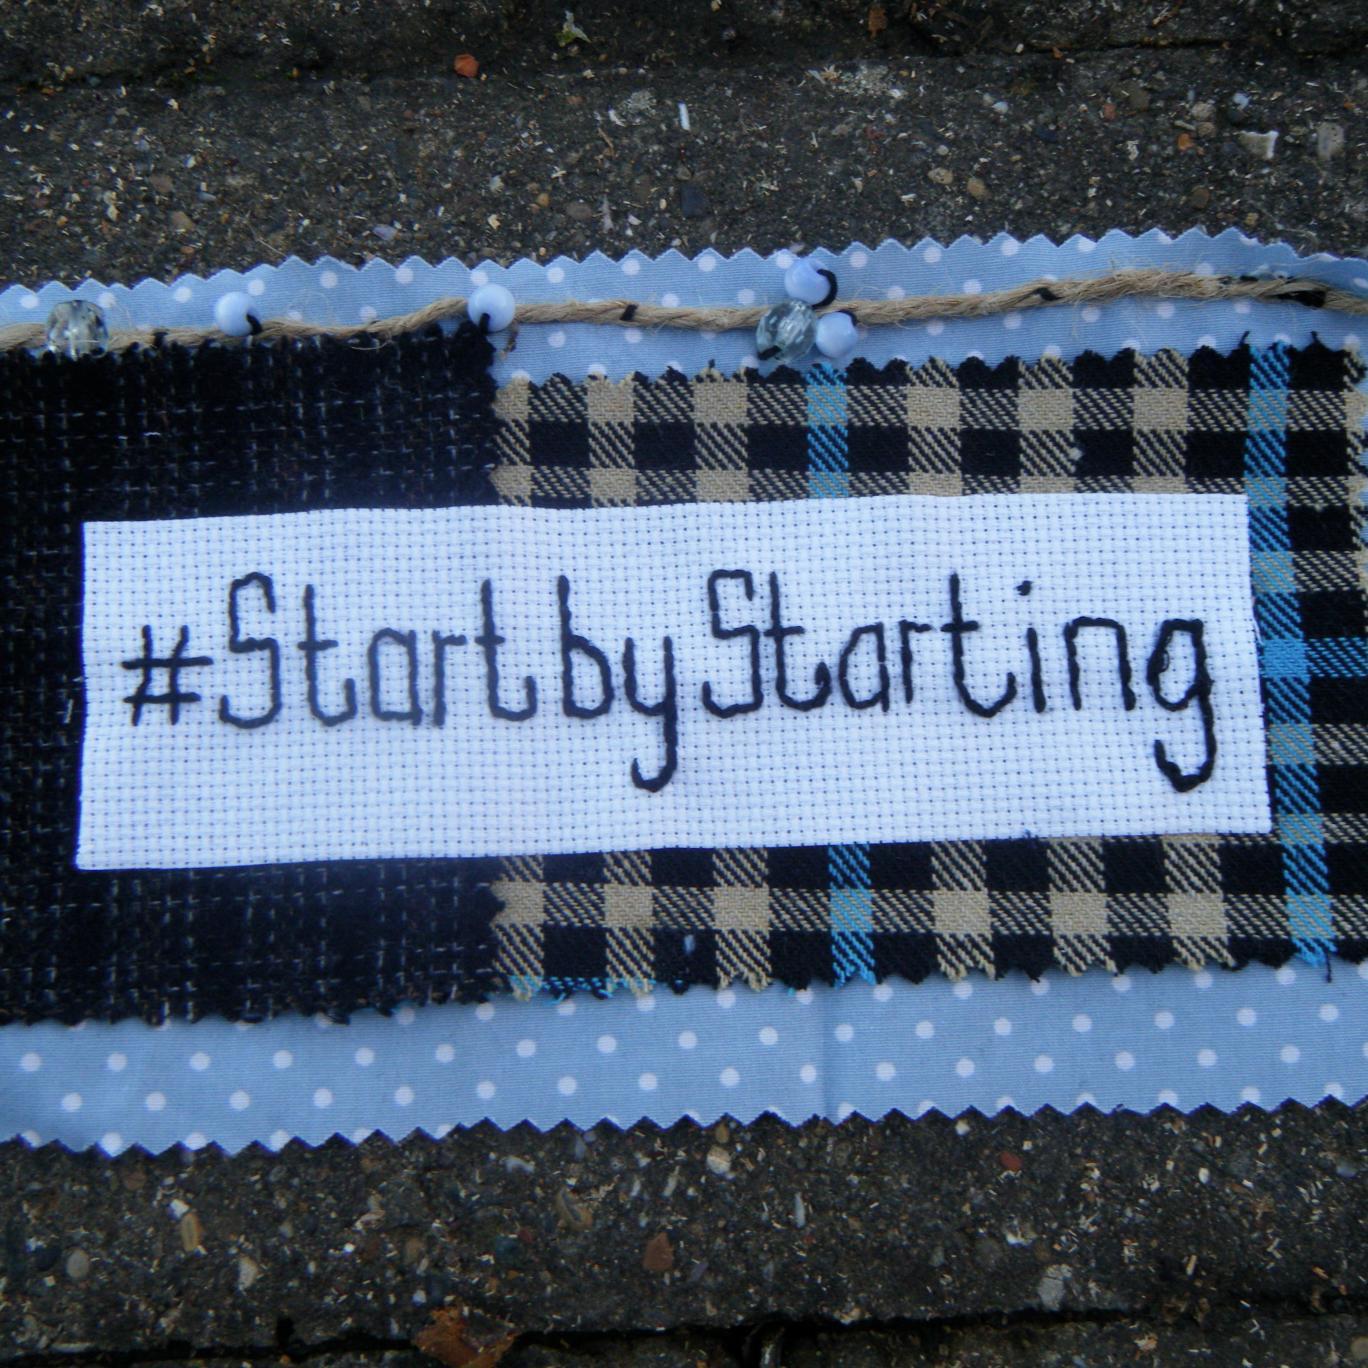 Urbanistas is women led empowering network for people interested in doing collaborative urban stuff. #StartbyStarting and sign up to our monthly meetups: